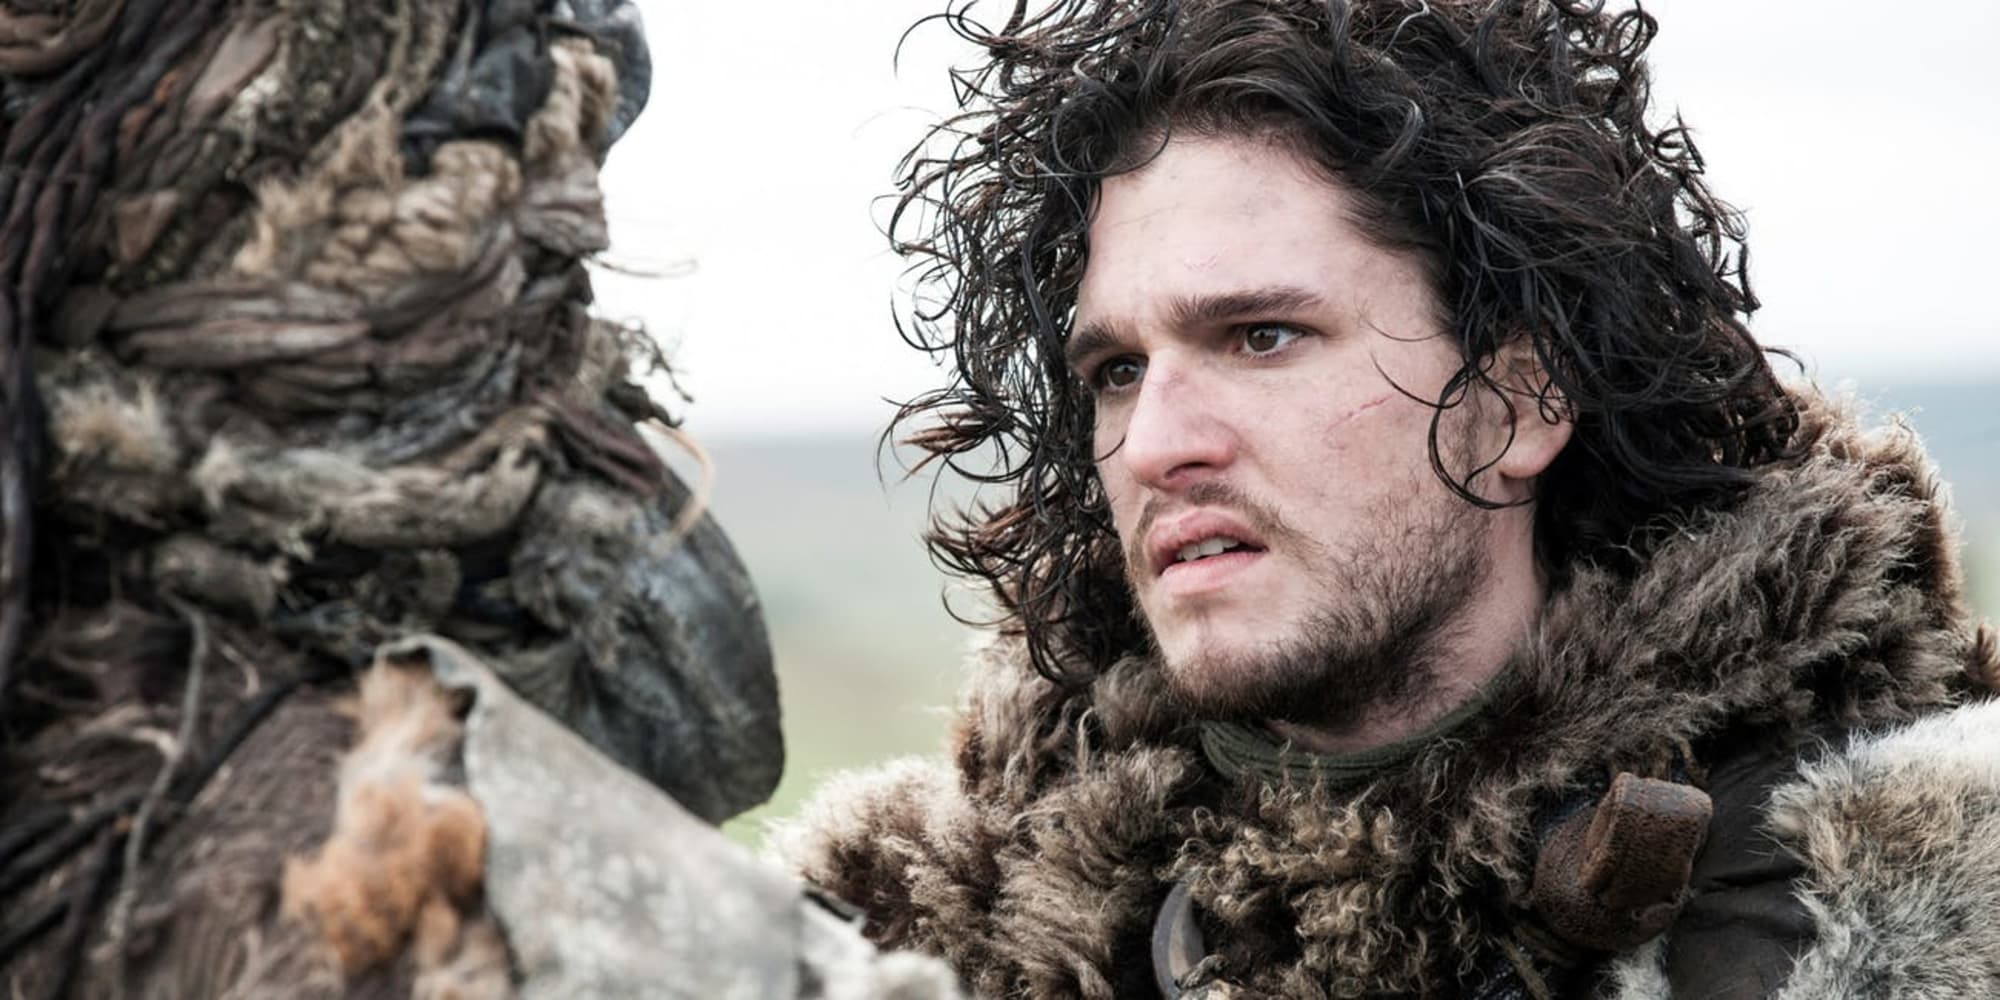 Kit Harington explains why he's still sporting his Game of Thrones hair